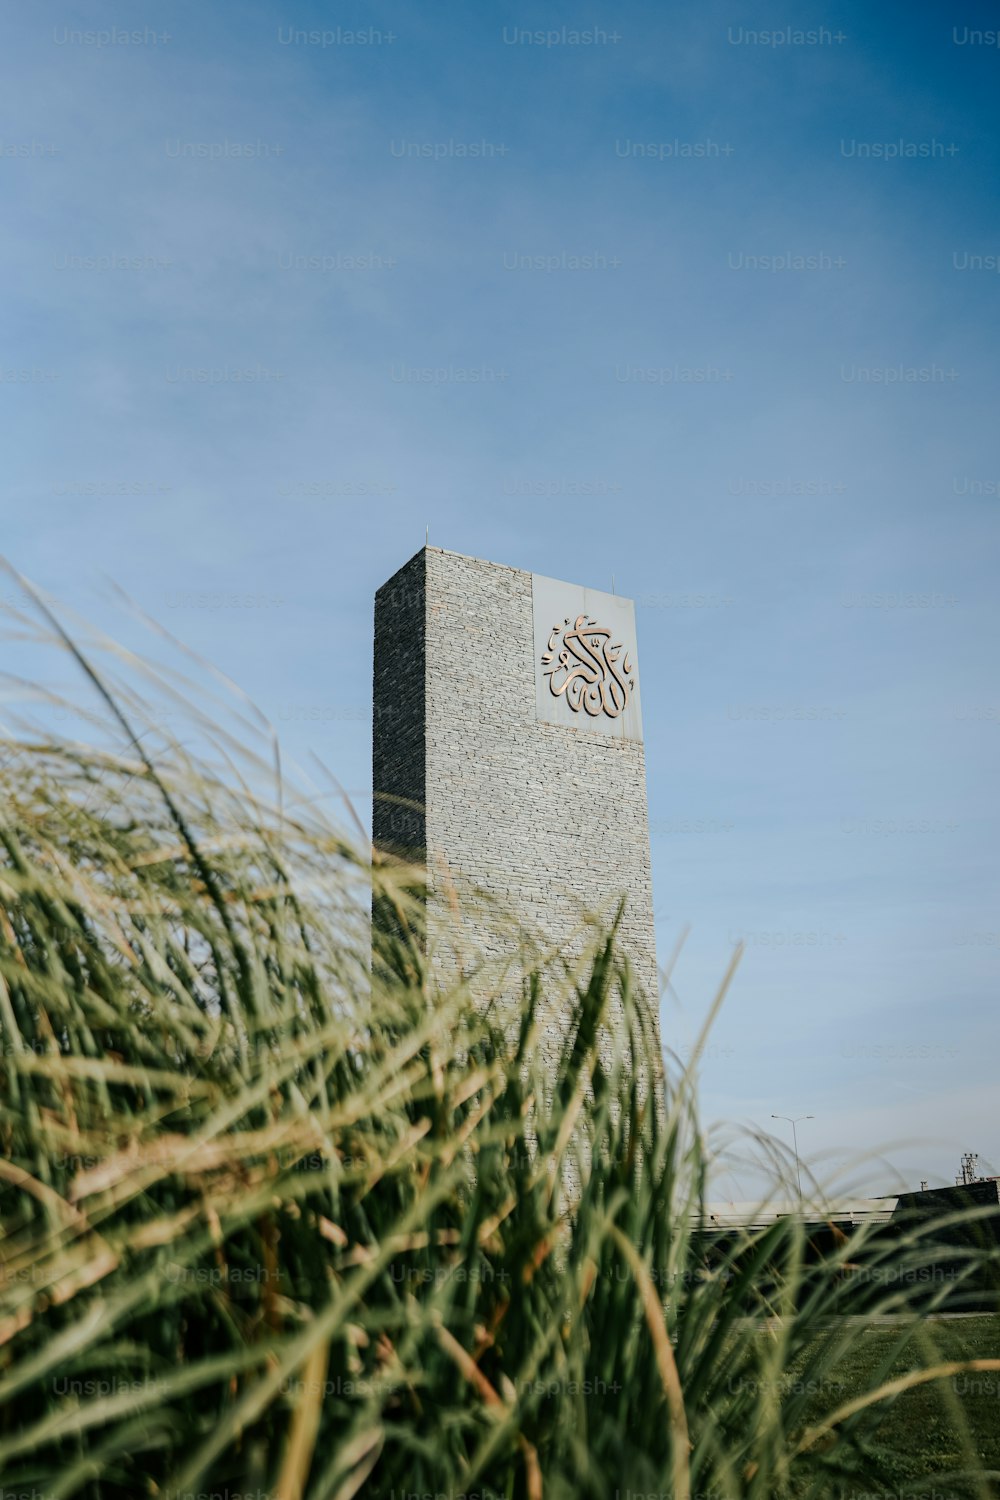 a monument in the middle of a grassy field